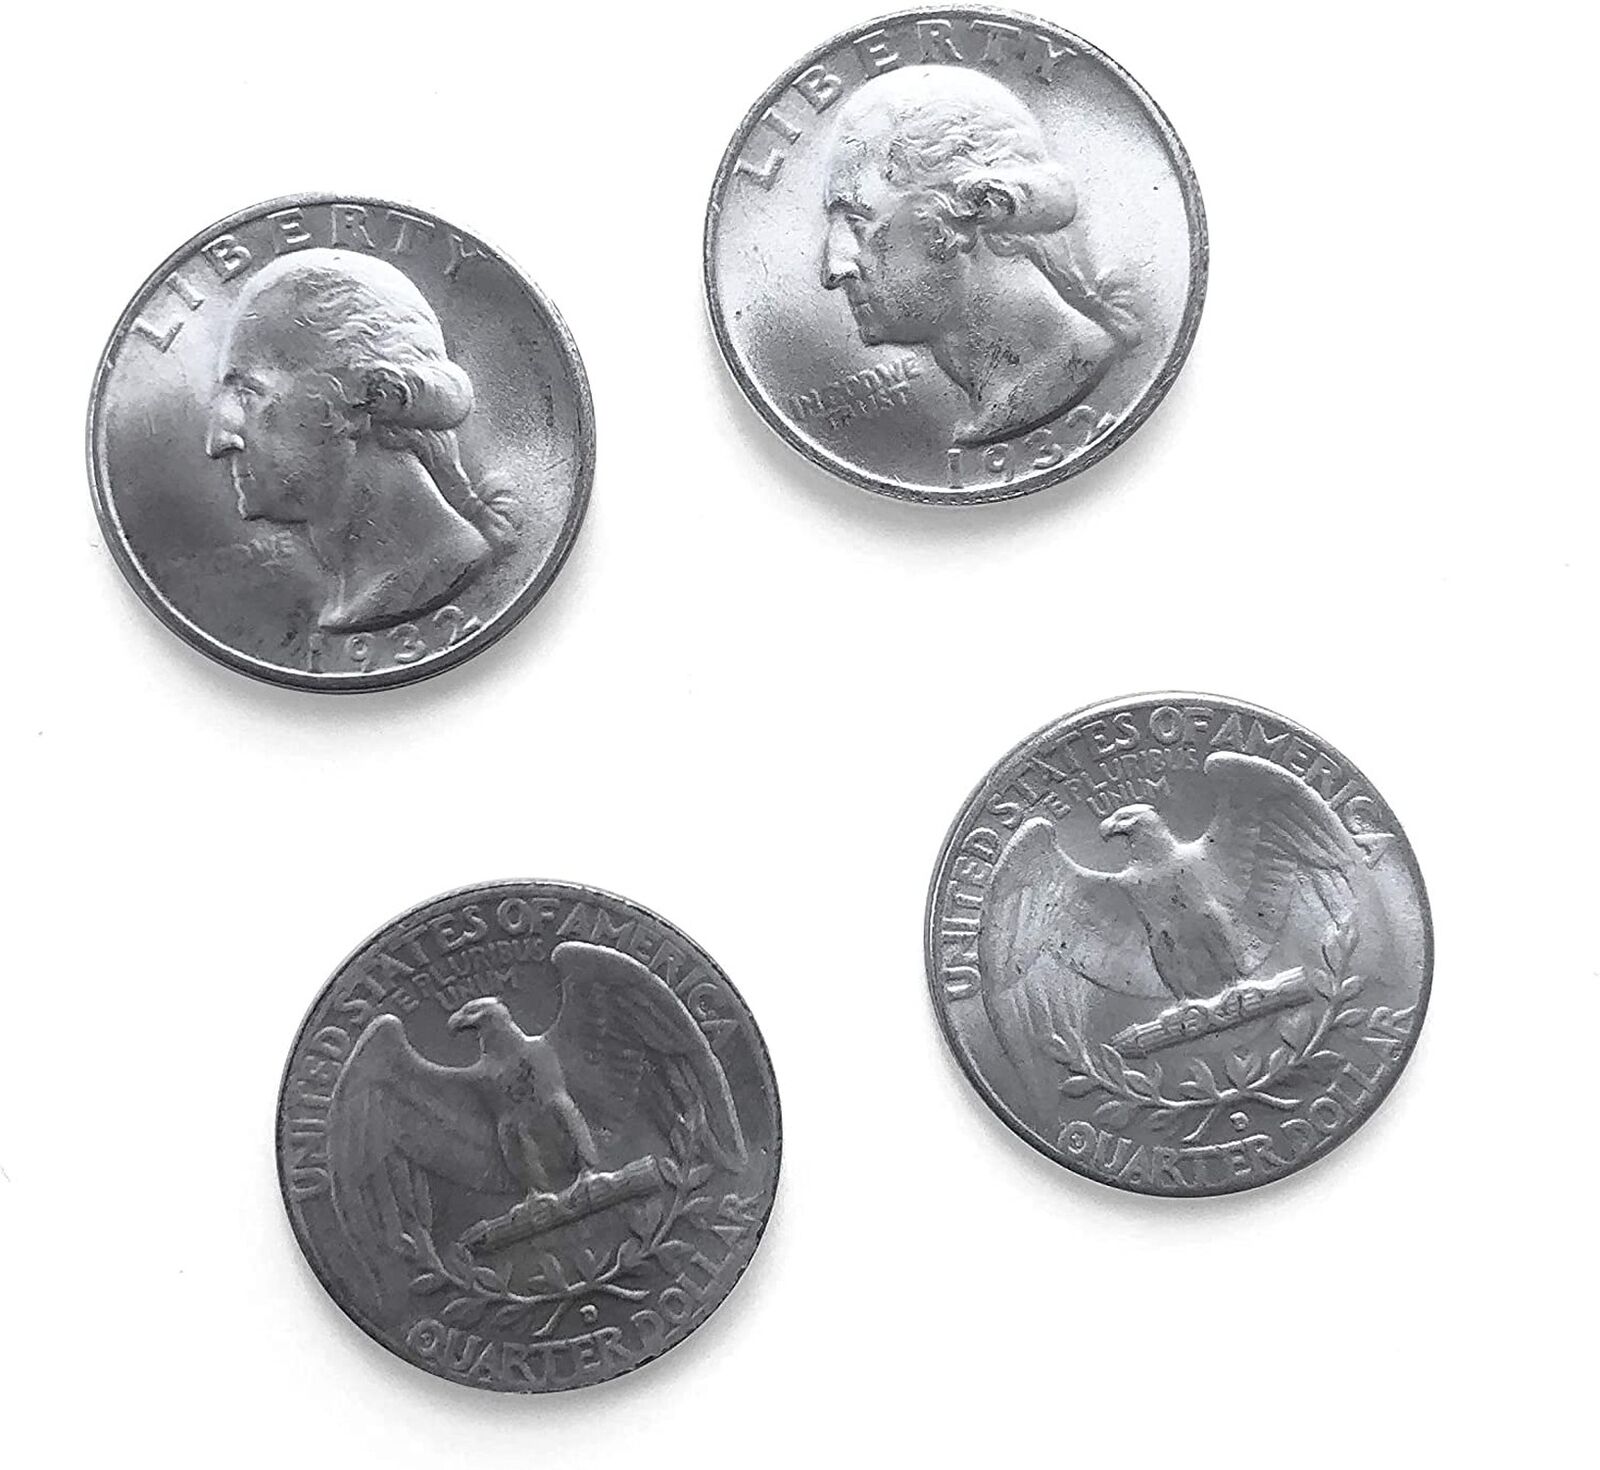 Canailles 2-Pack Double-Sided Quarters, 1 Double-Sided Heads Coin and 1 Doubl...